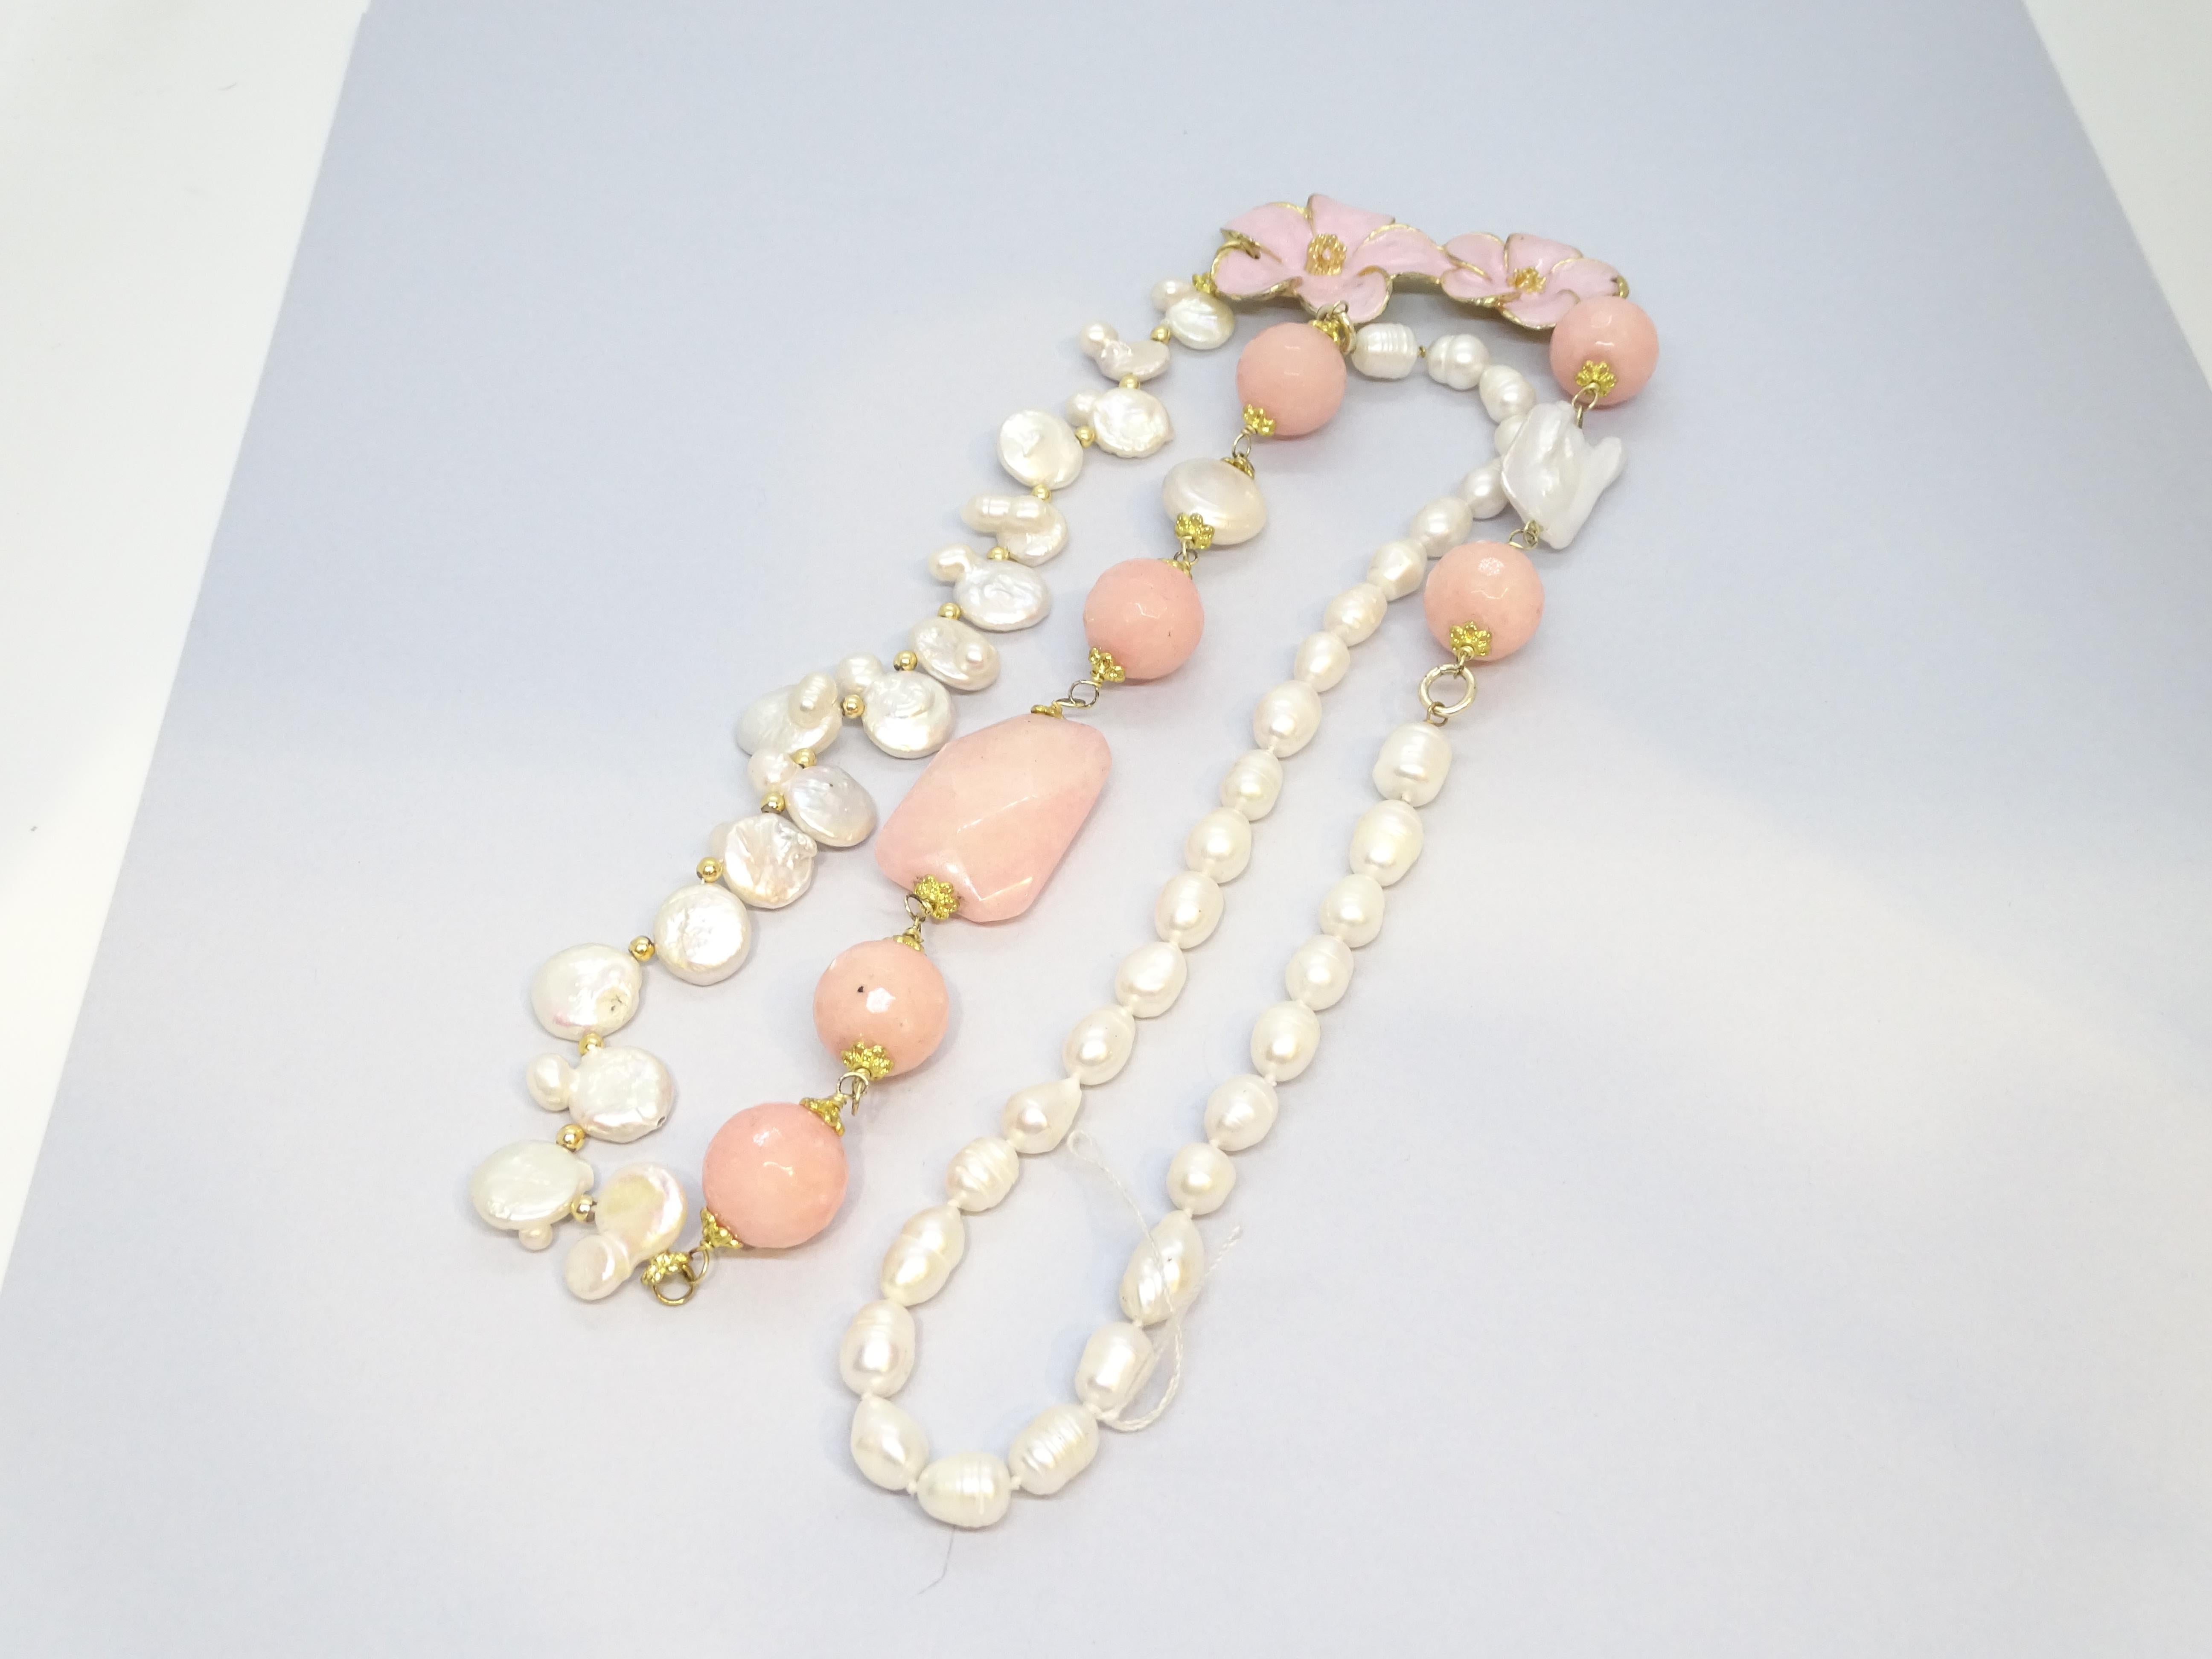 Italian necklace with baroque pearls, rose quartz and enamel For Sale 2